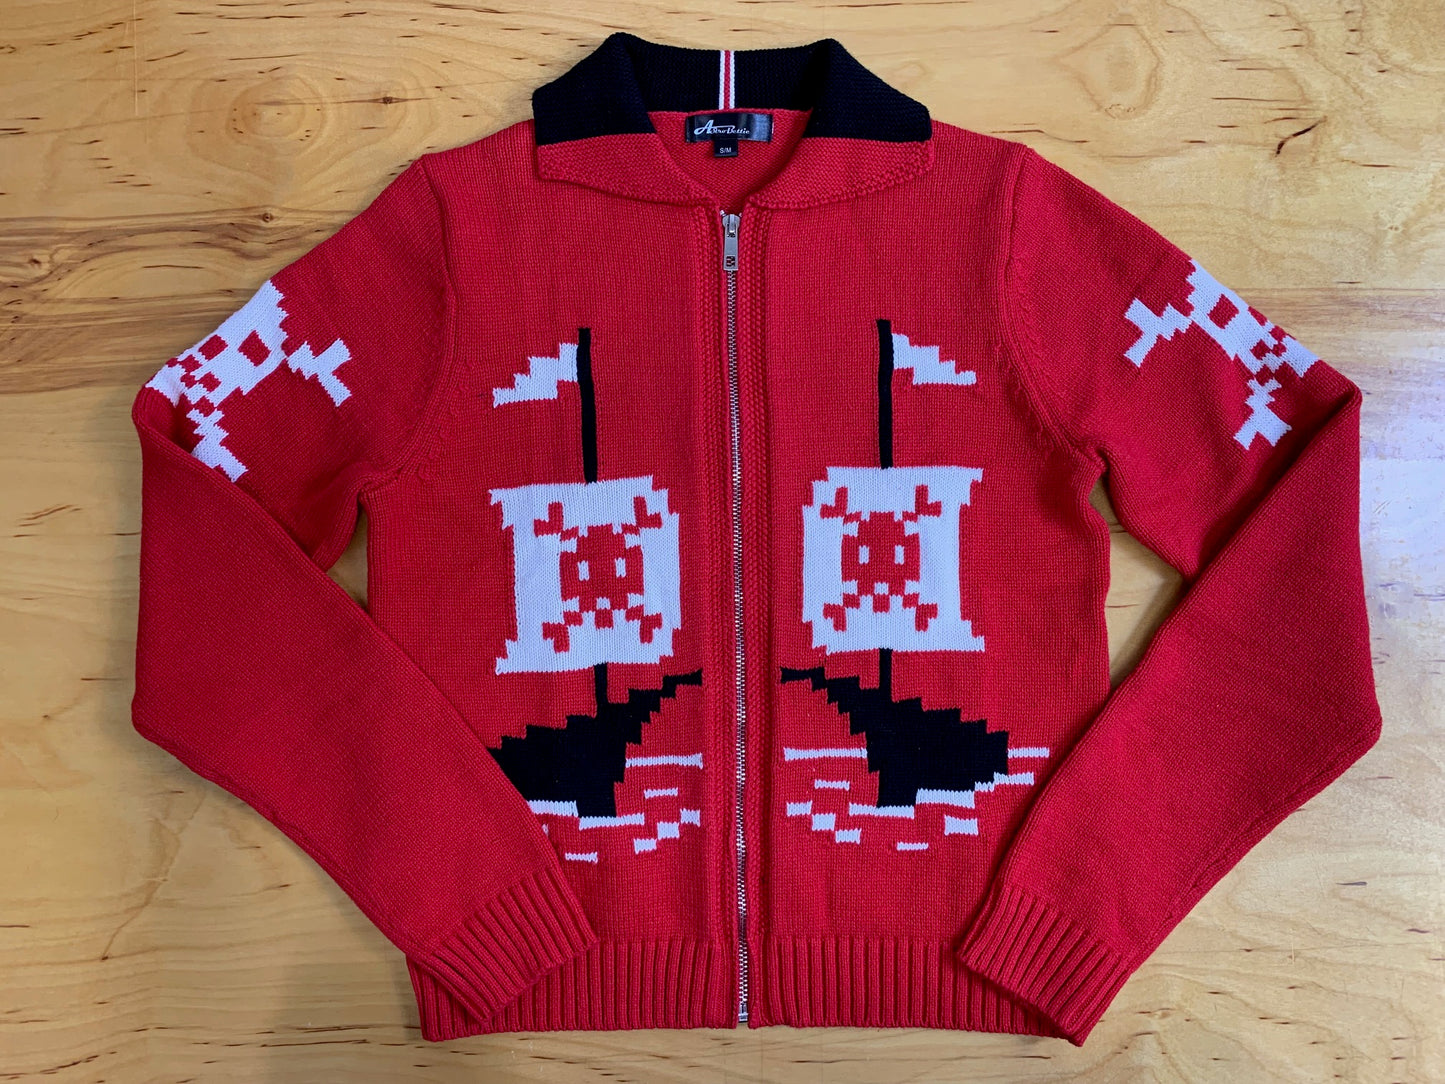 AHOY 1950's Pirate and Skulls Sweater-Red